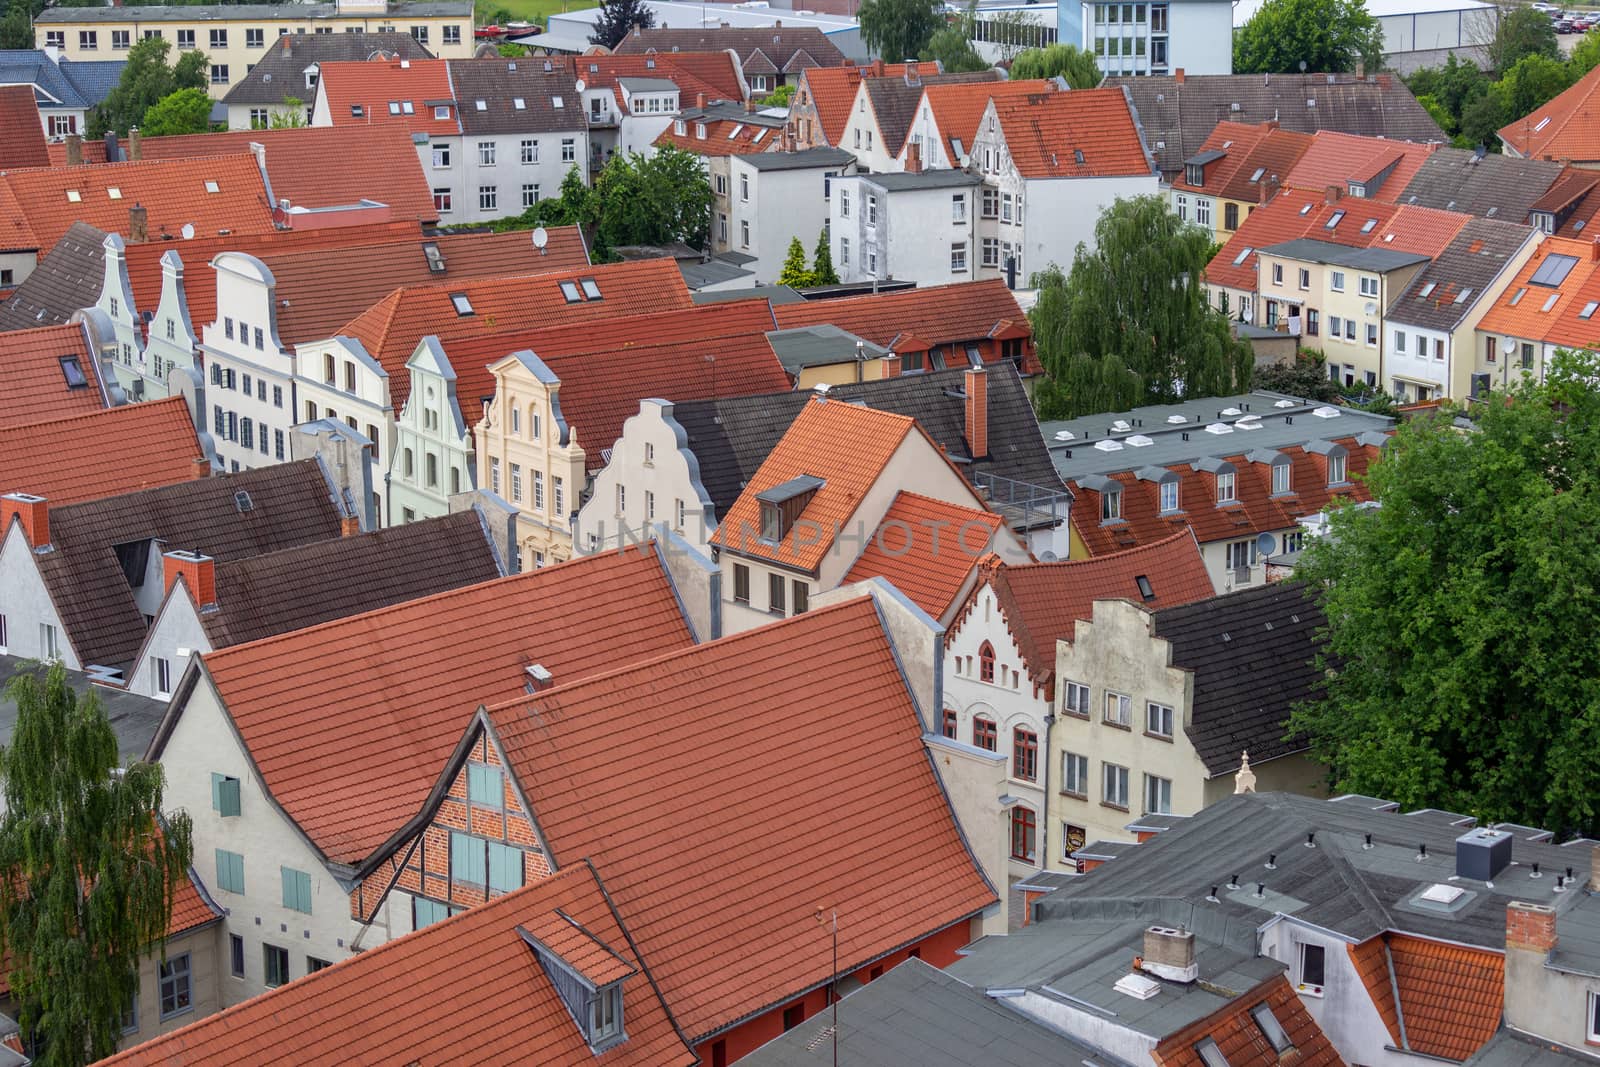 High angle view at the Hanseatic city Wismar, Germany